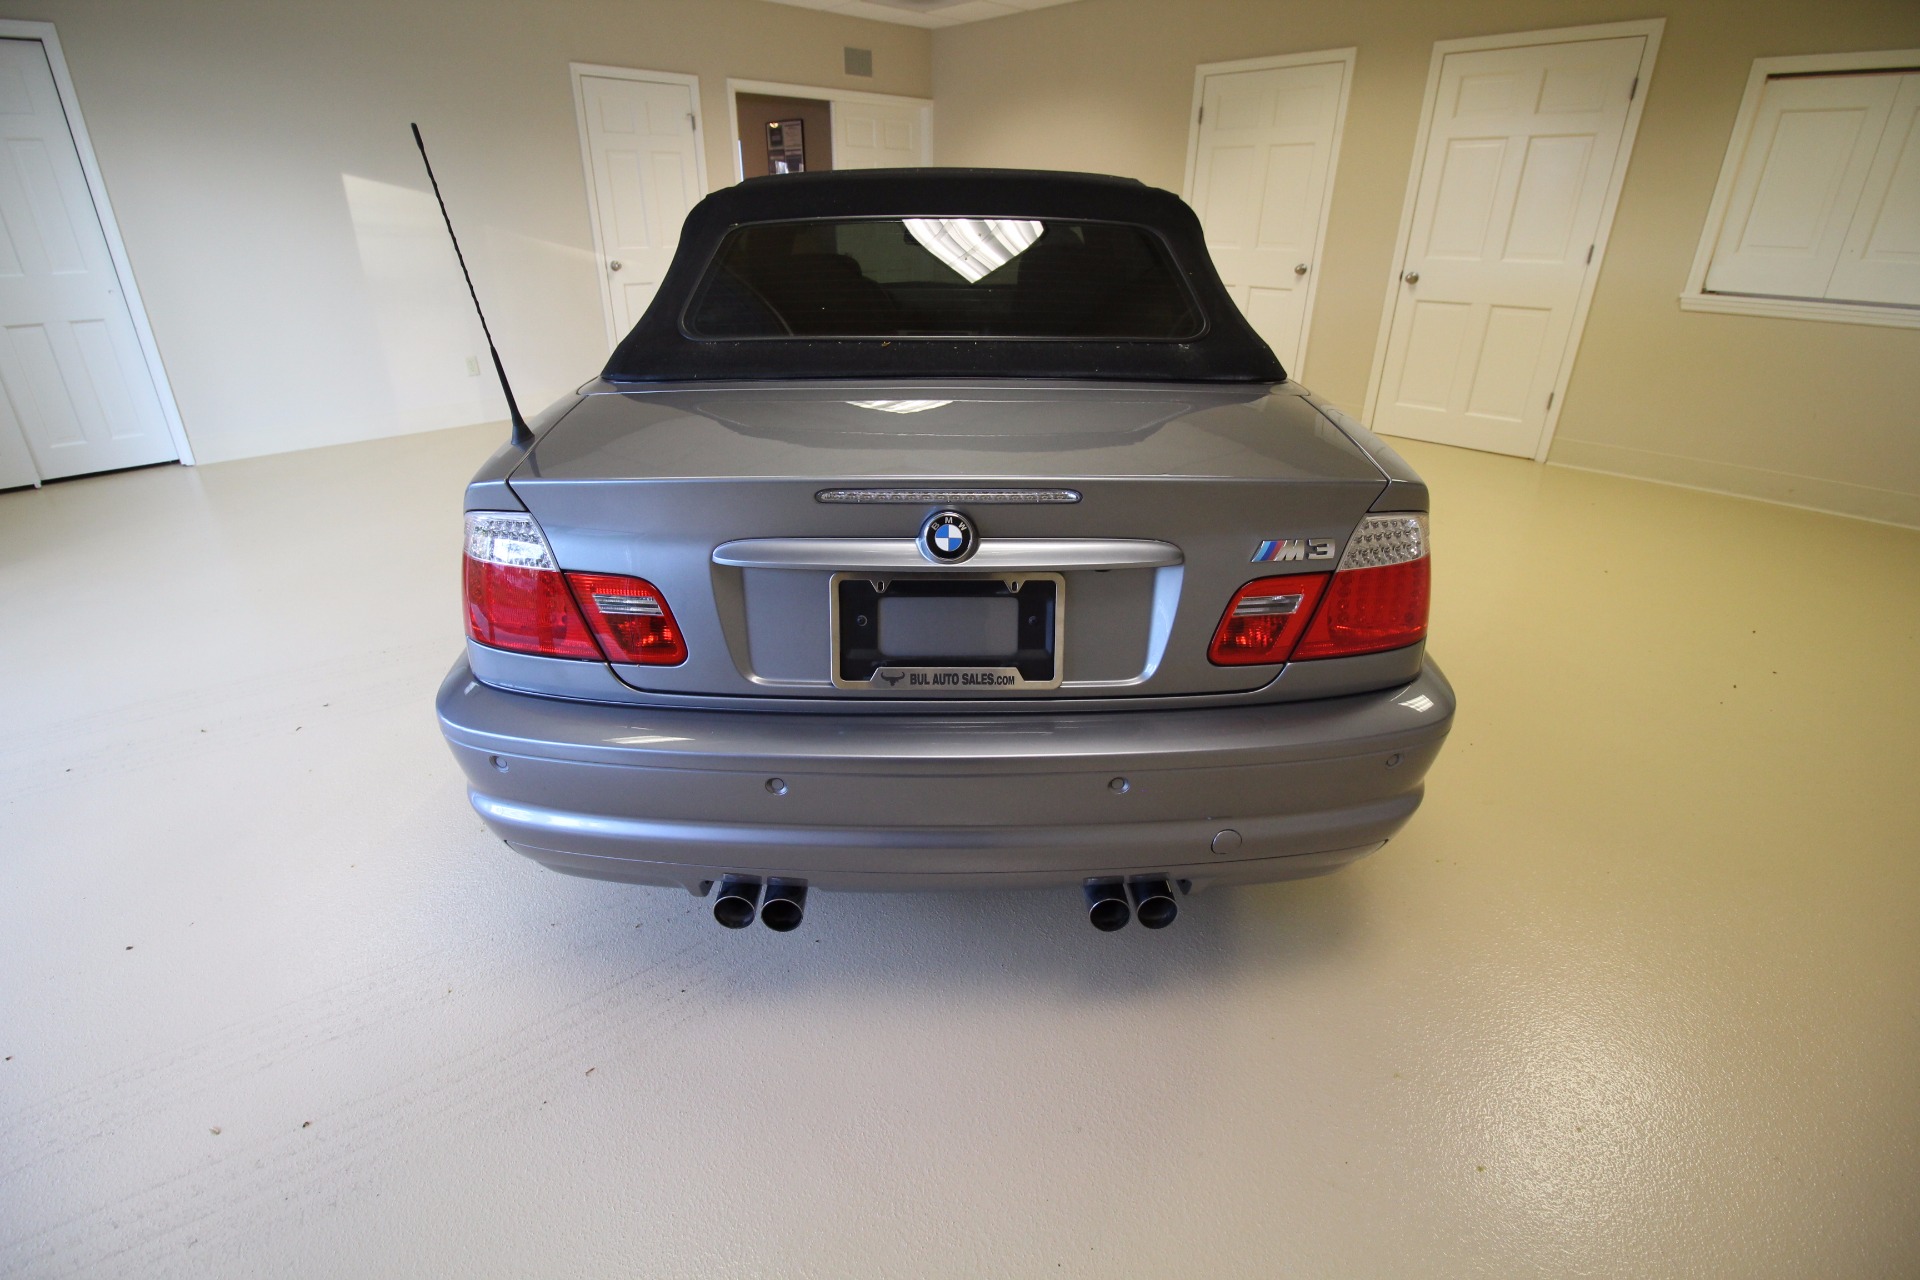 Used 2004 Silver Gray Metallic with Black Soft Top BMW M3 Convertible | Albany, NY